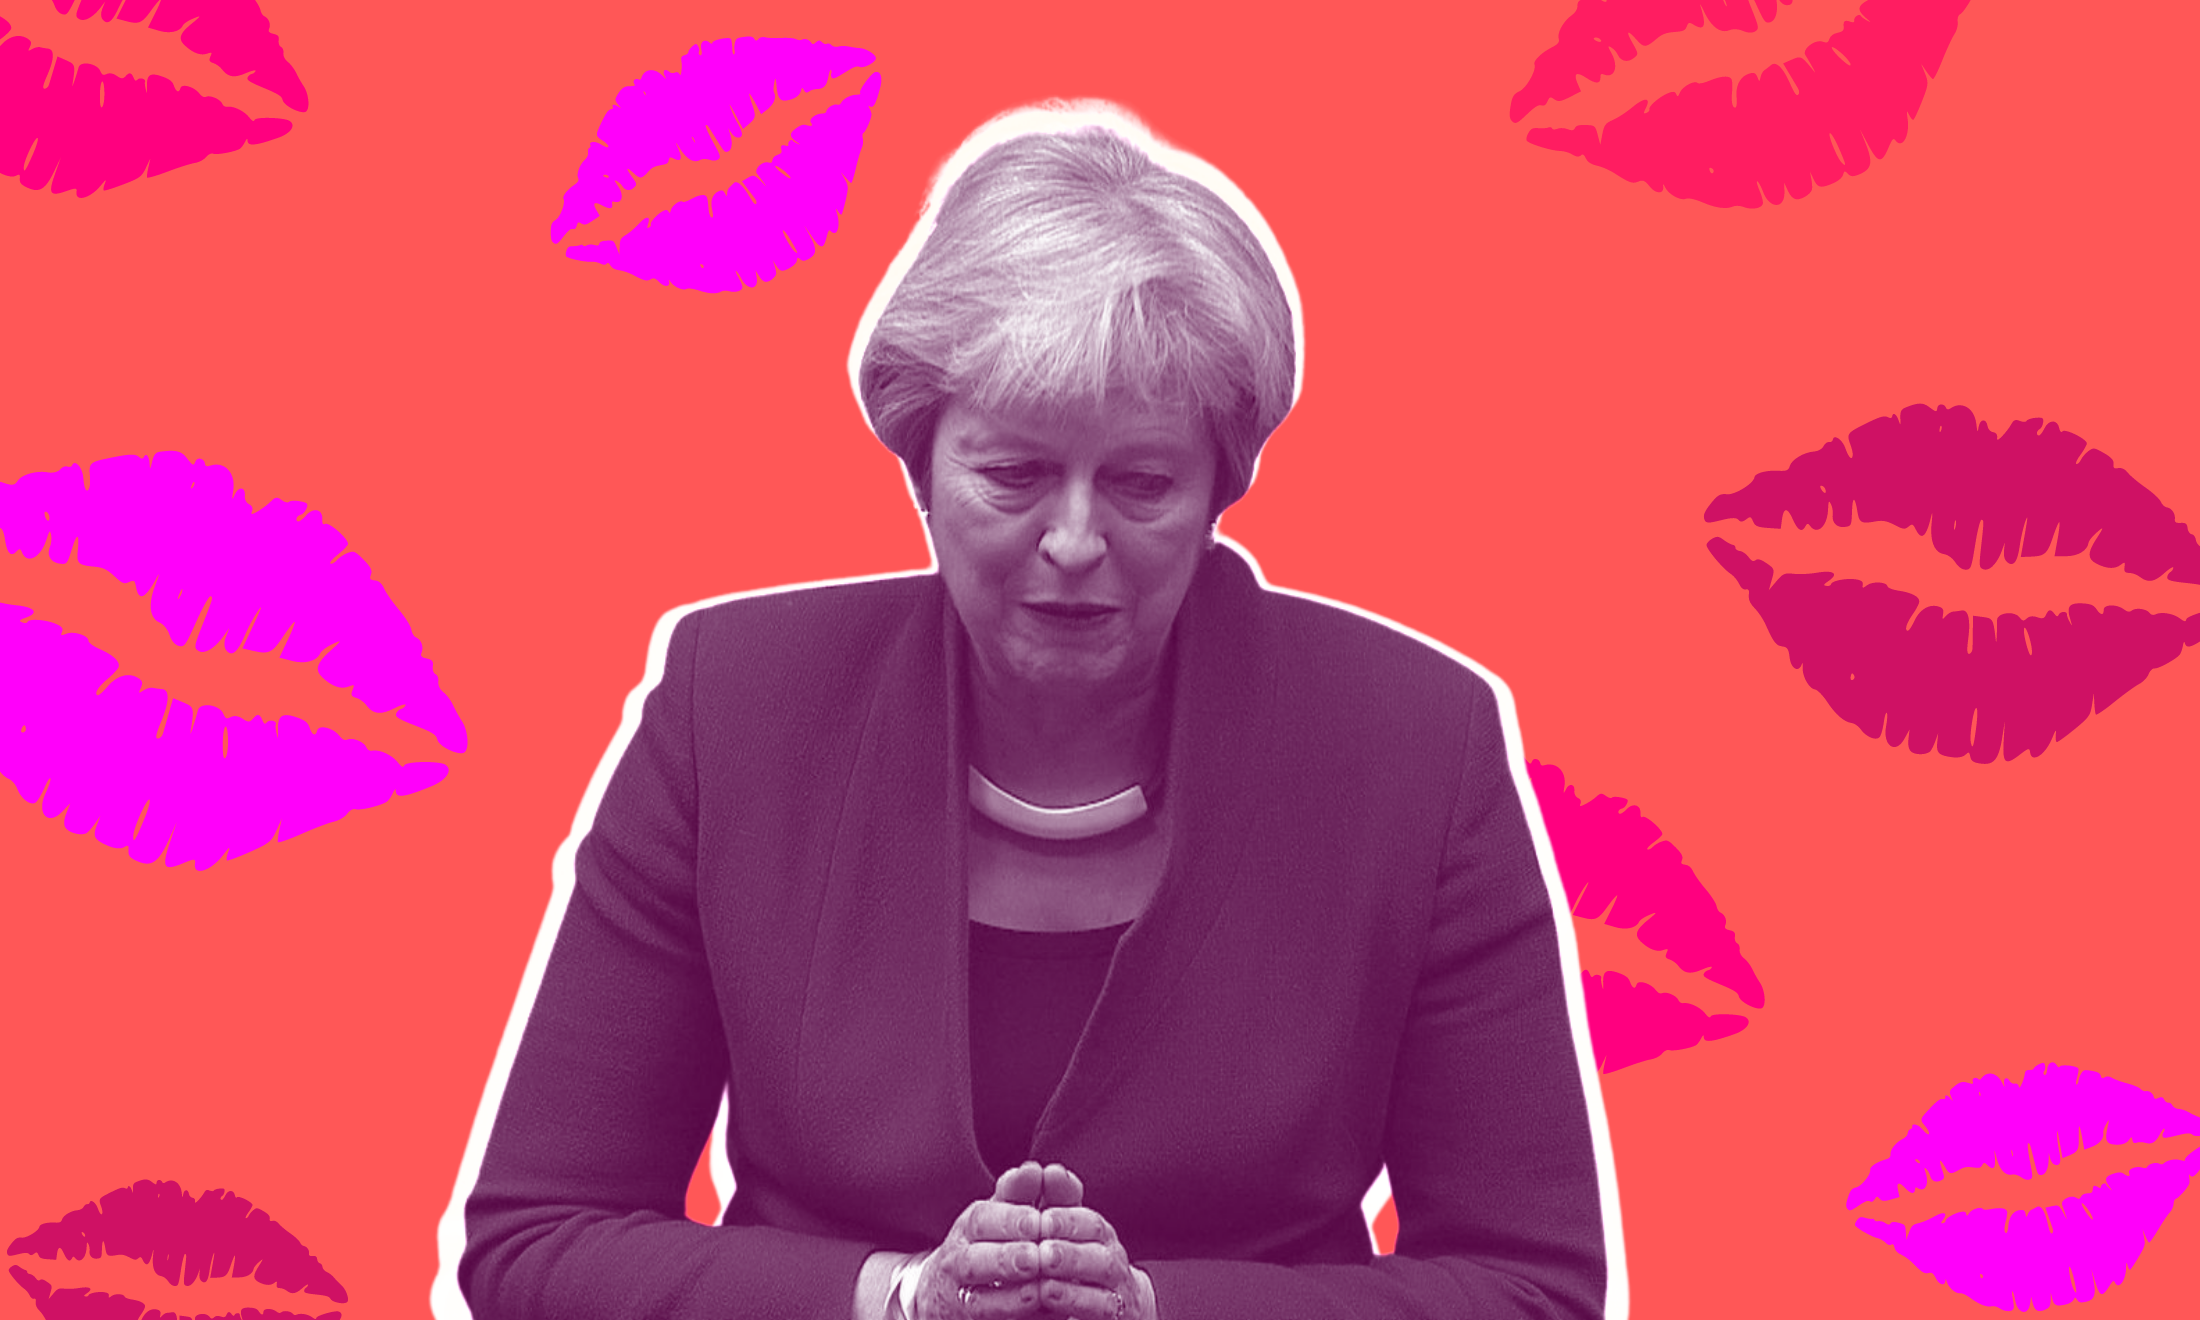 Yassifying Theresa May? Not in my lifetime